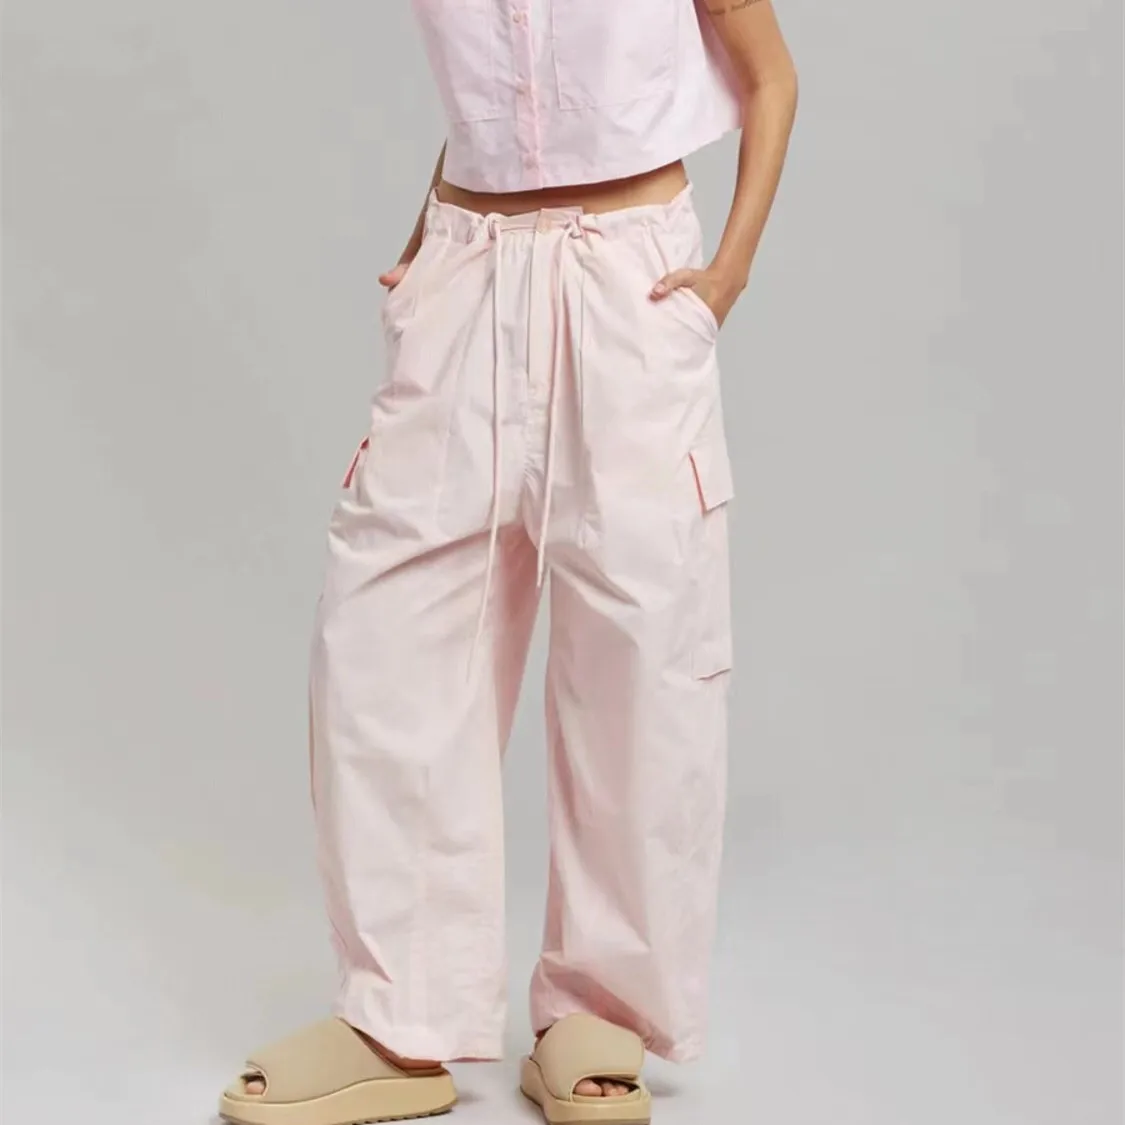 New Female Fashion Straight Casual Wide Leg Pants Waist Drawstring Hip Hop Workwear Cargo Pockets Trousers for Women